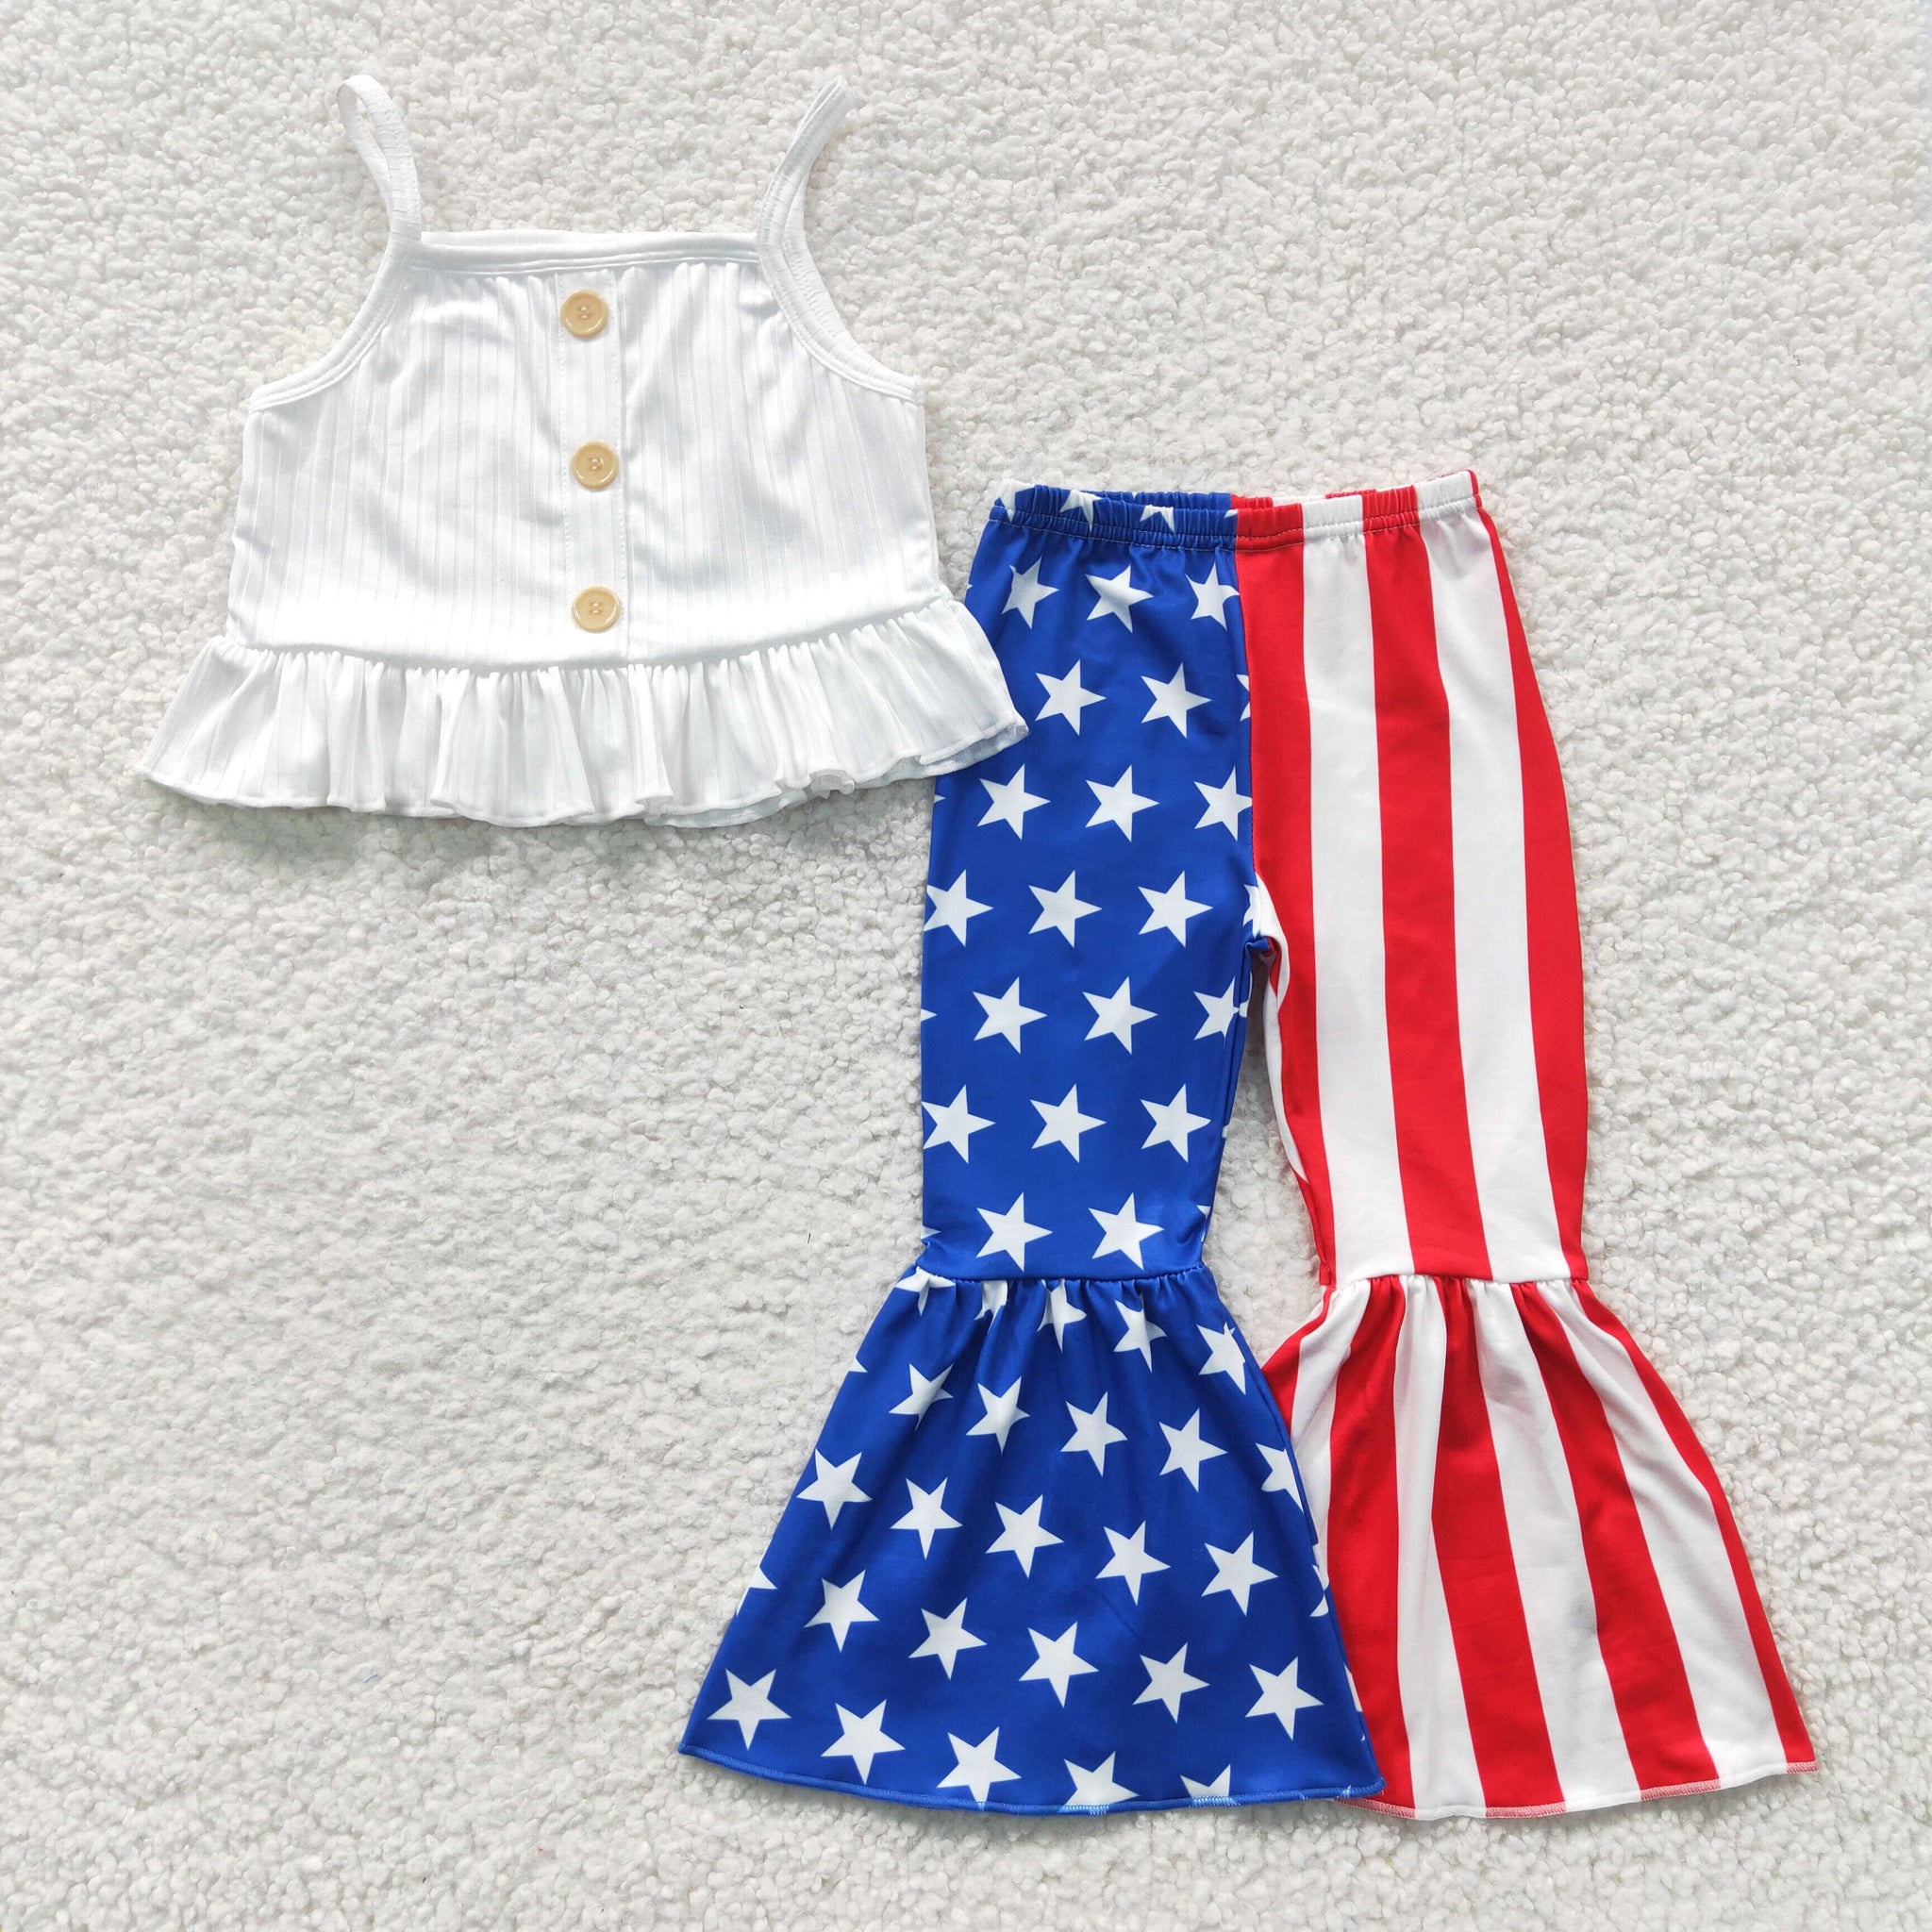 GSPO0480 kids clothes girls july 4th patriotic outfits